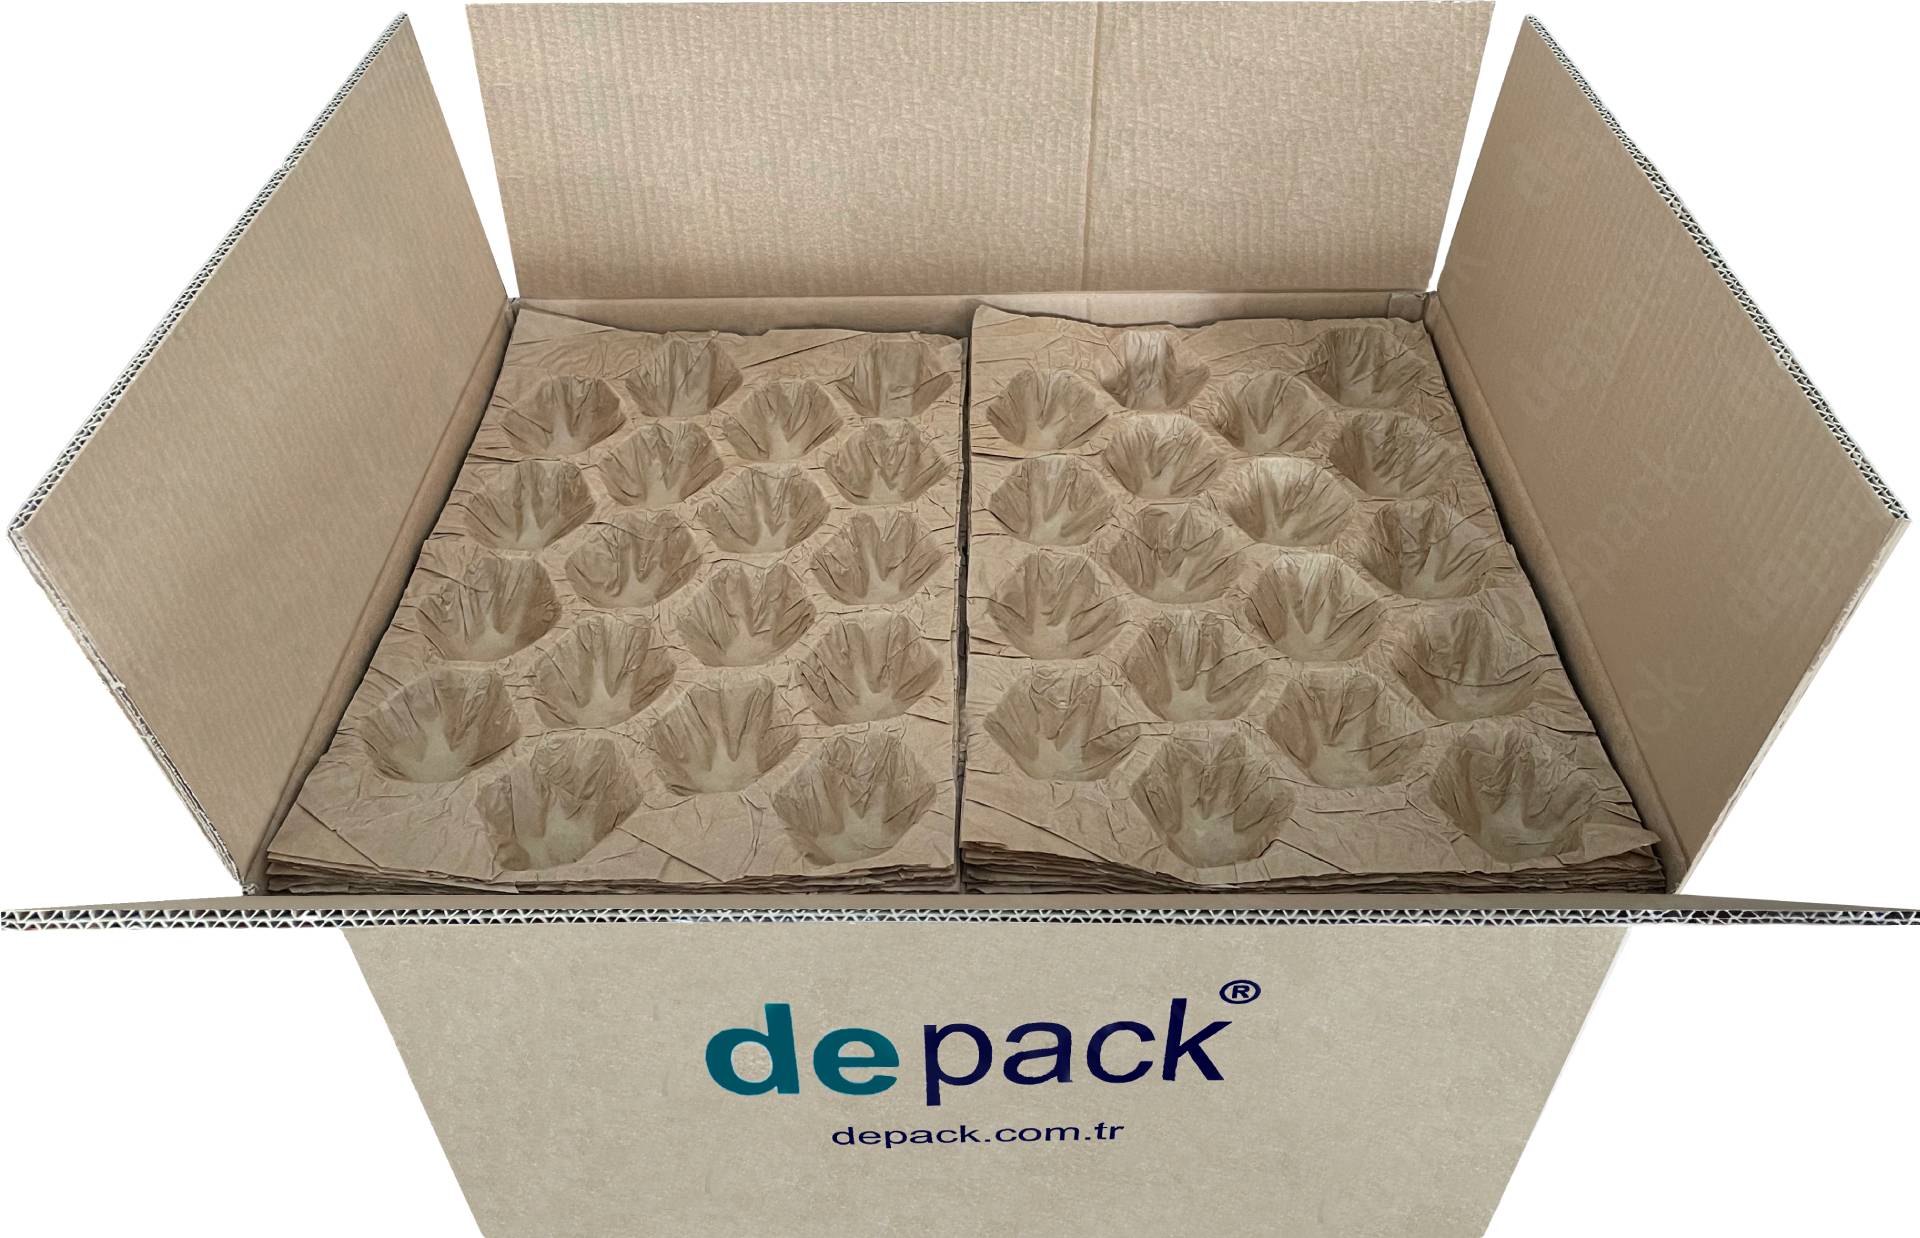 Depack Packaging stacked Paper Tray in a cardboard box